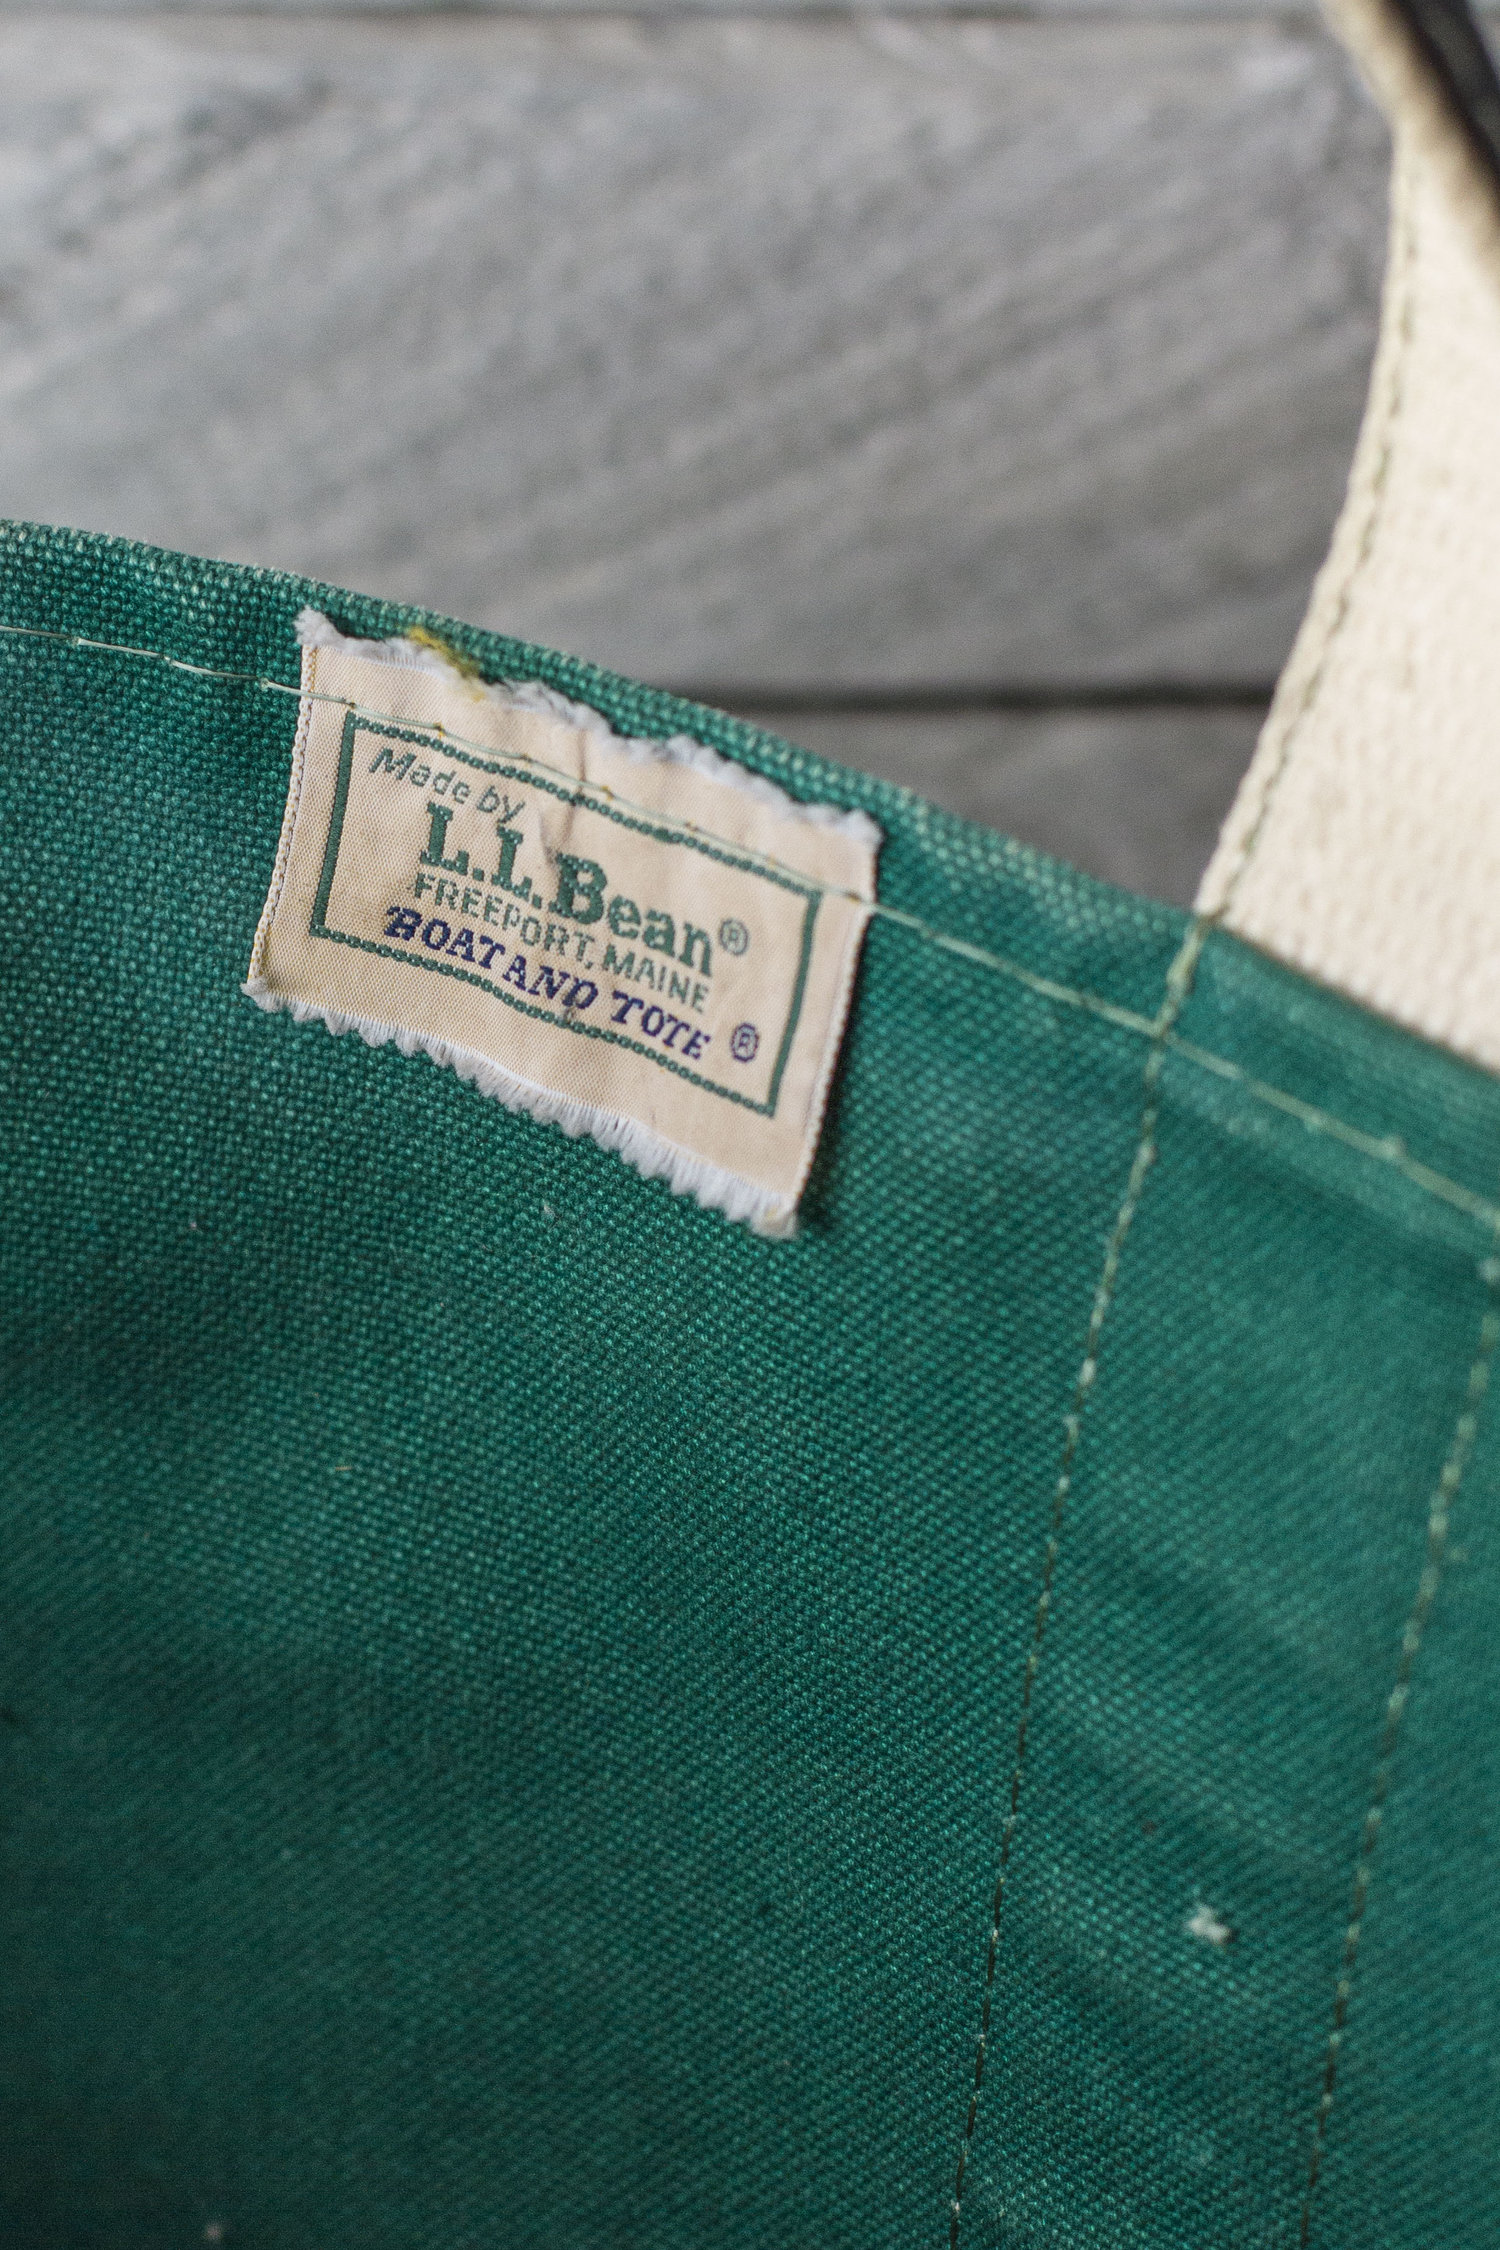 Vintage 70s 80s Ll Bean Extra Large Canvas Boat N Tote by L.l.